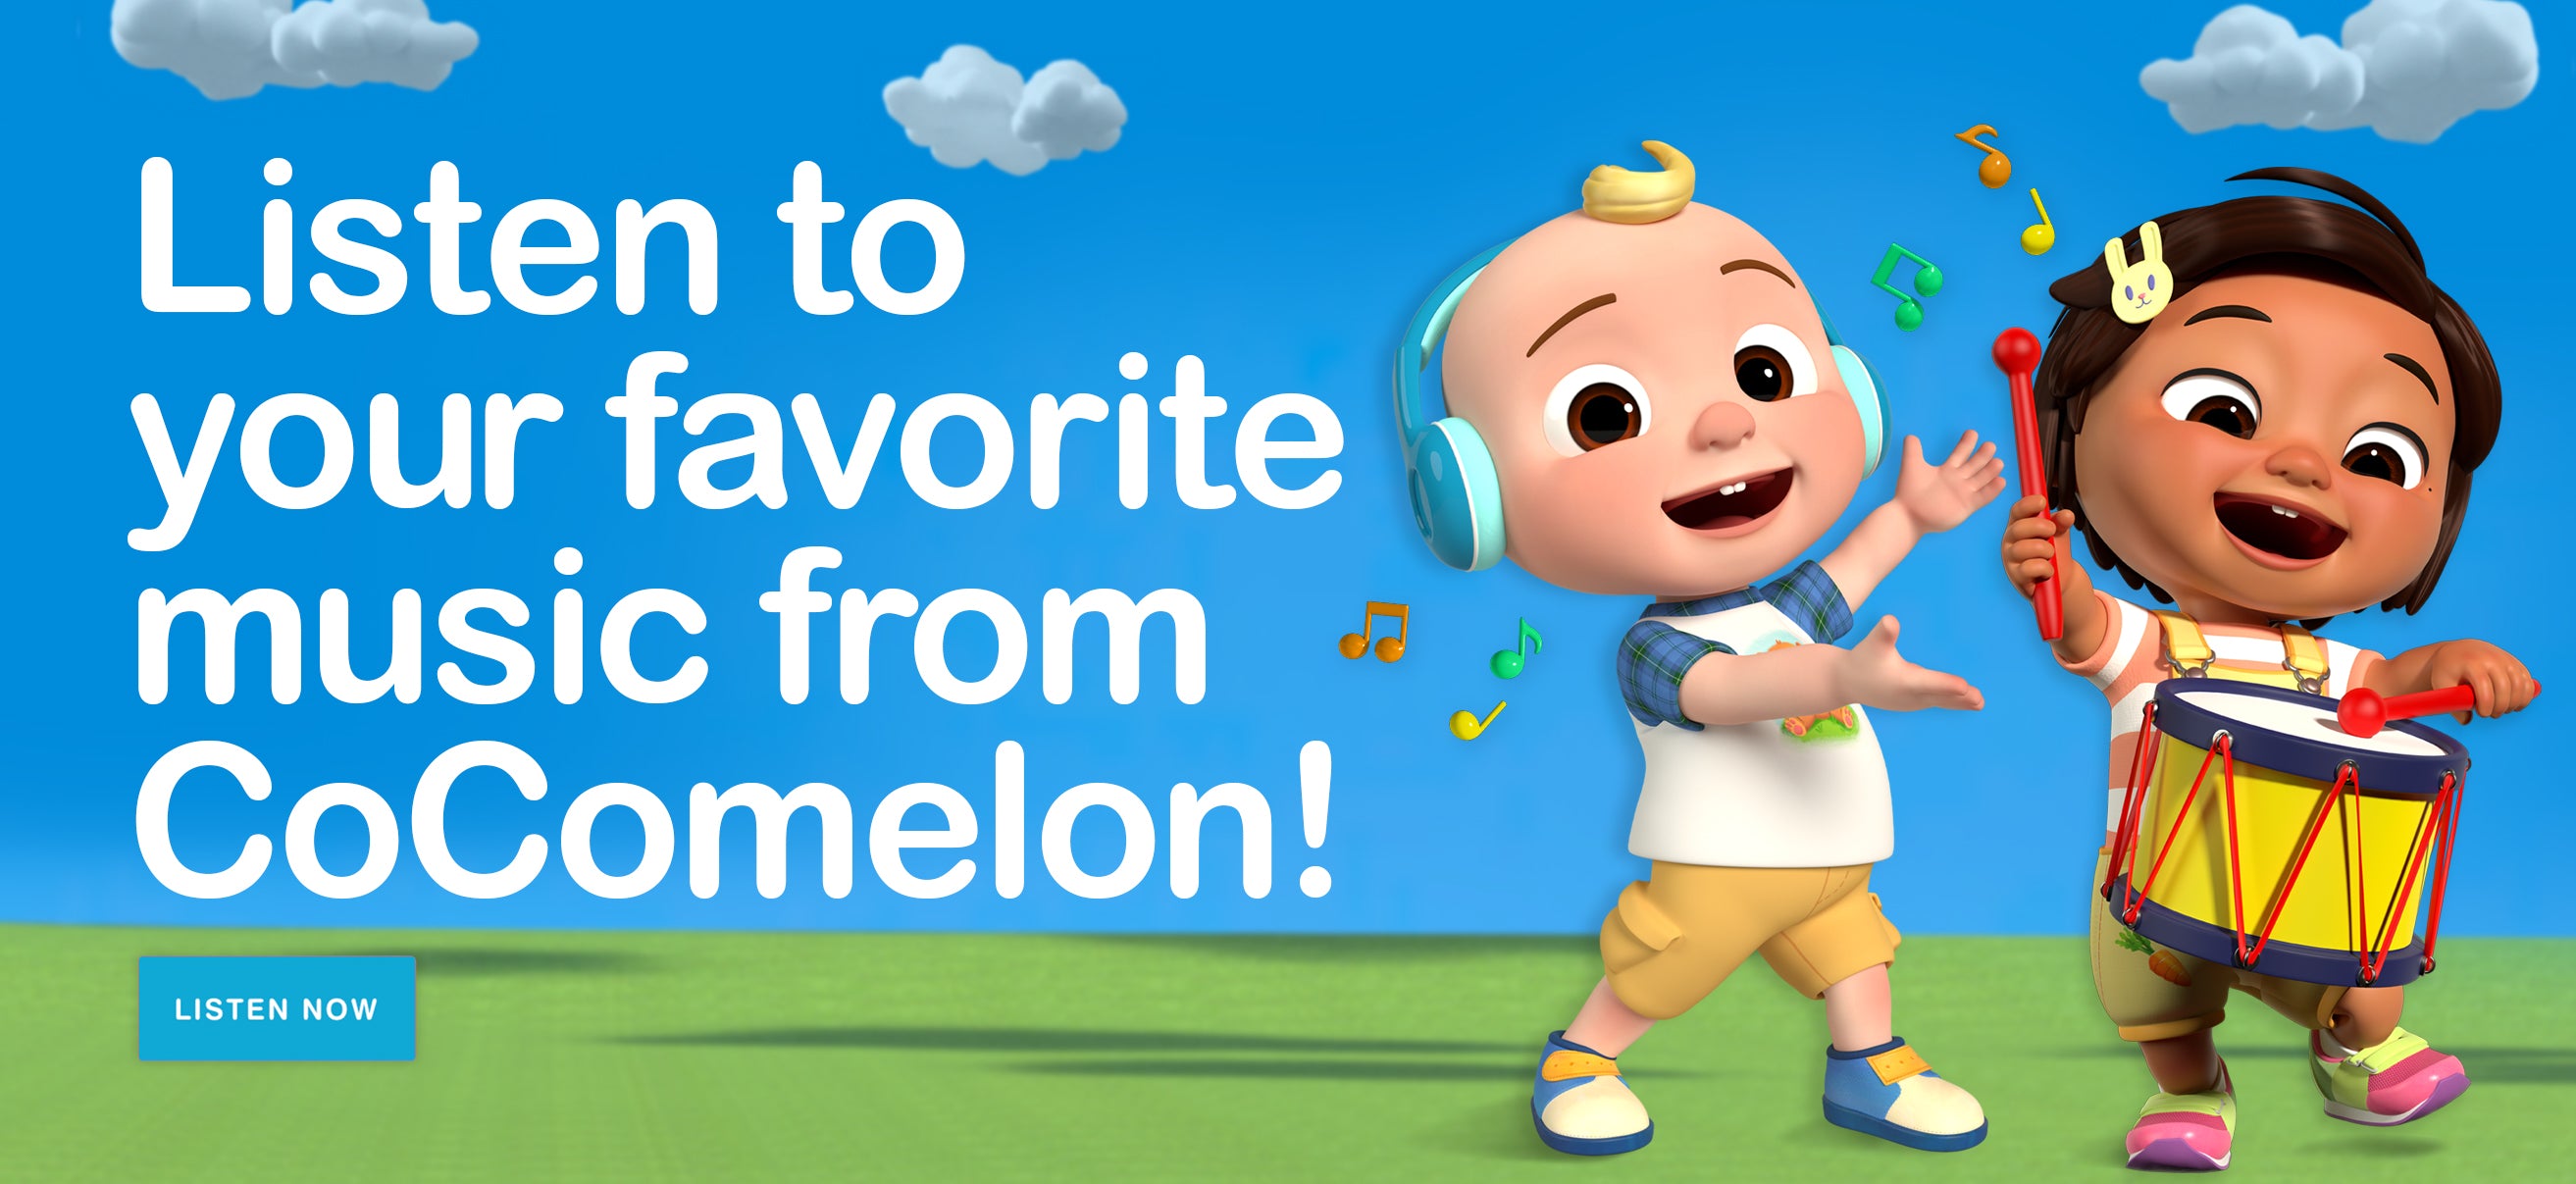 Listen to your favorite music from CoComelon!